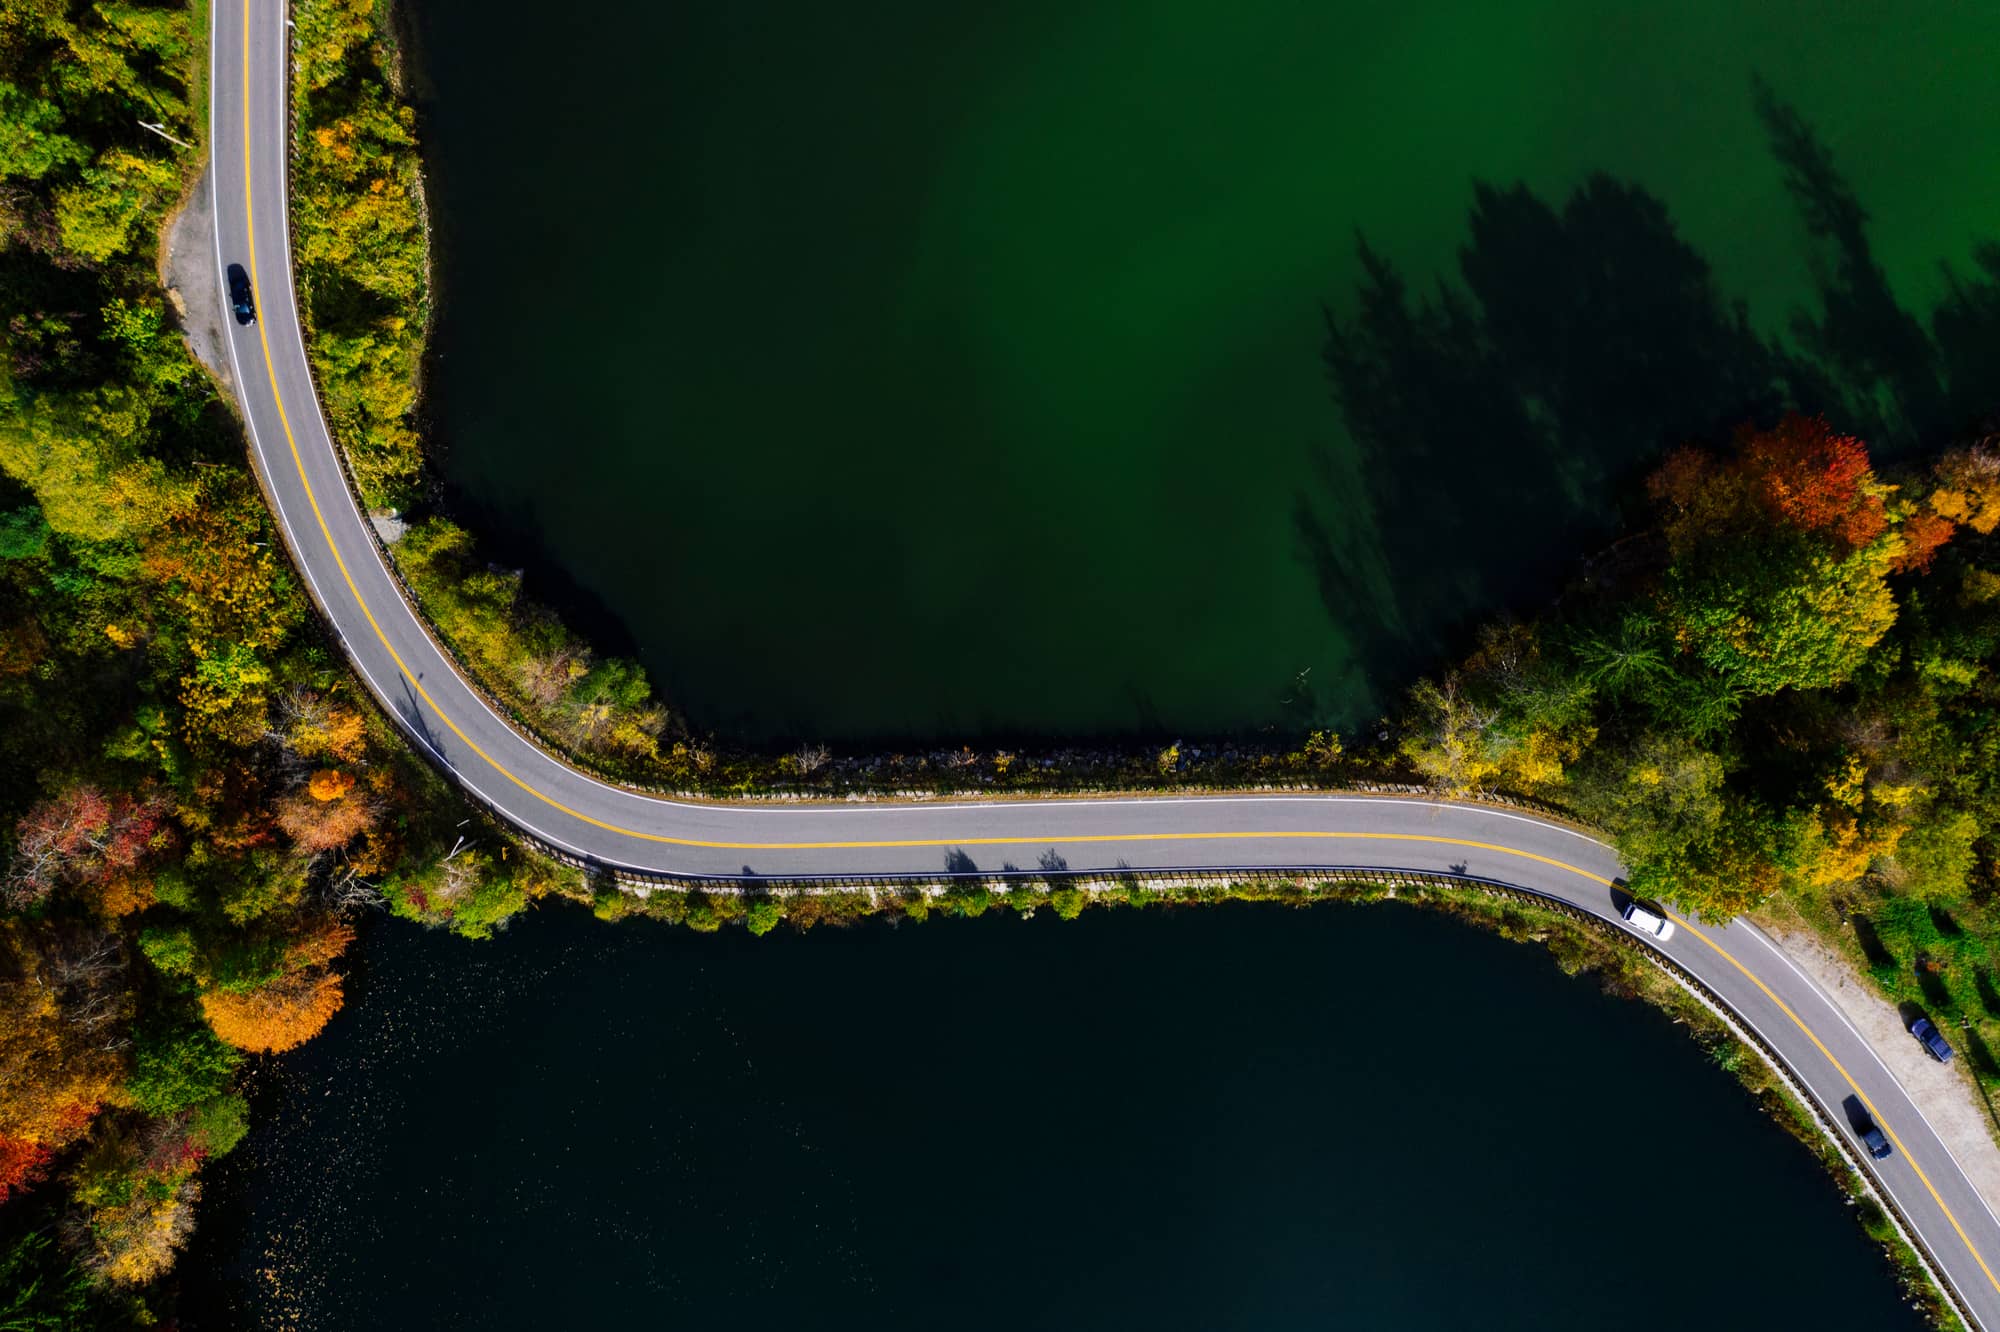 Aerial view of a car on a road